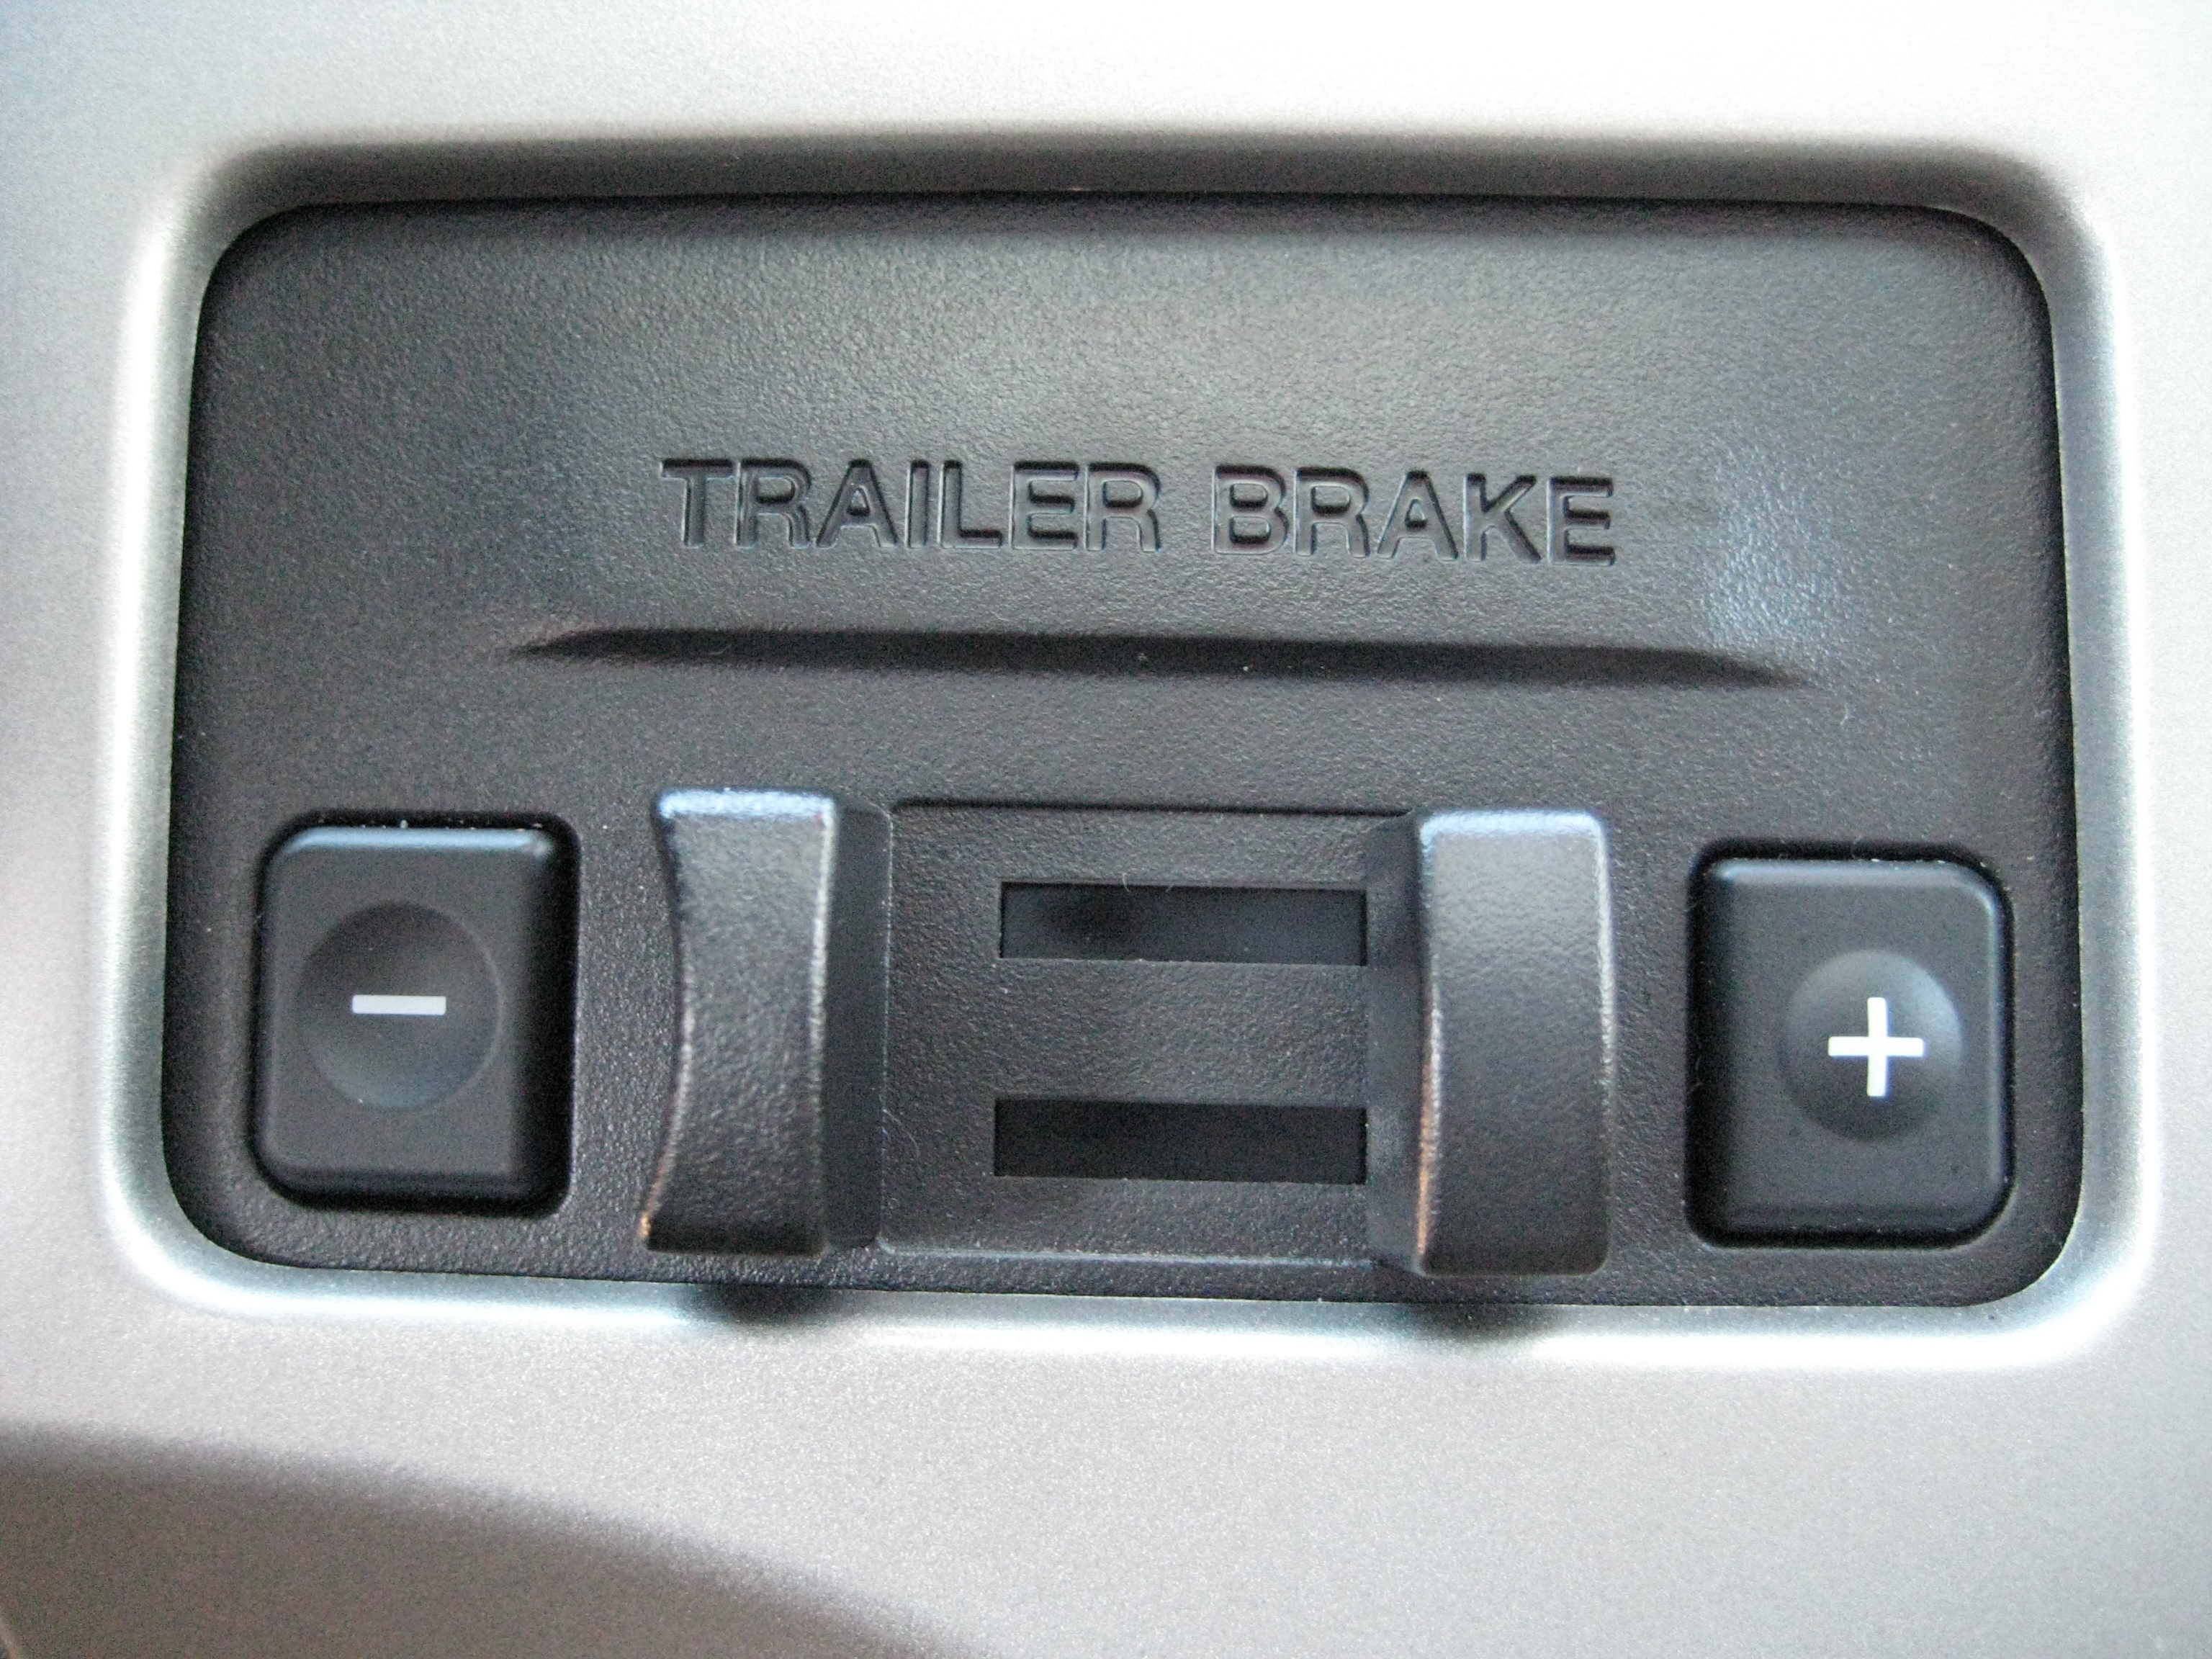 How to install trailer brake controller on ford f250 #1